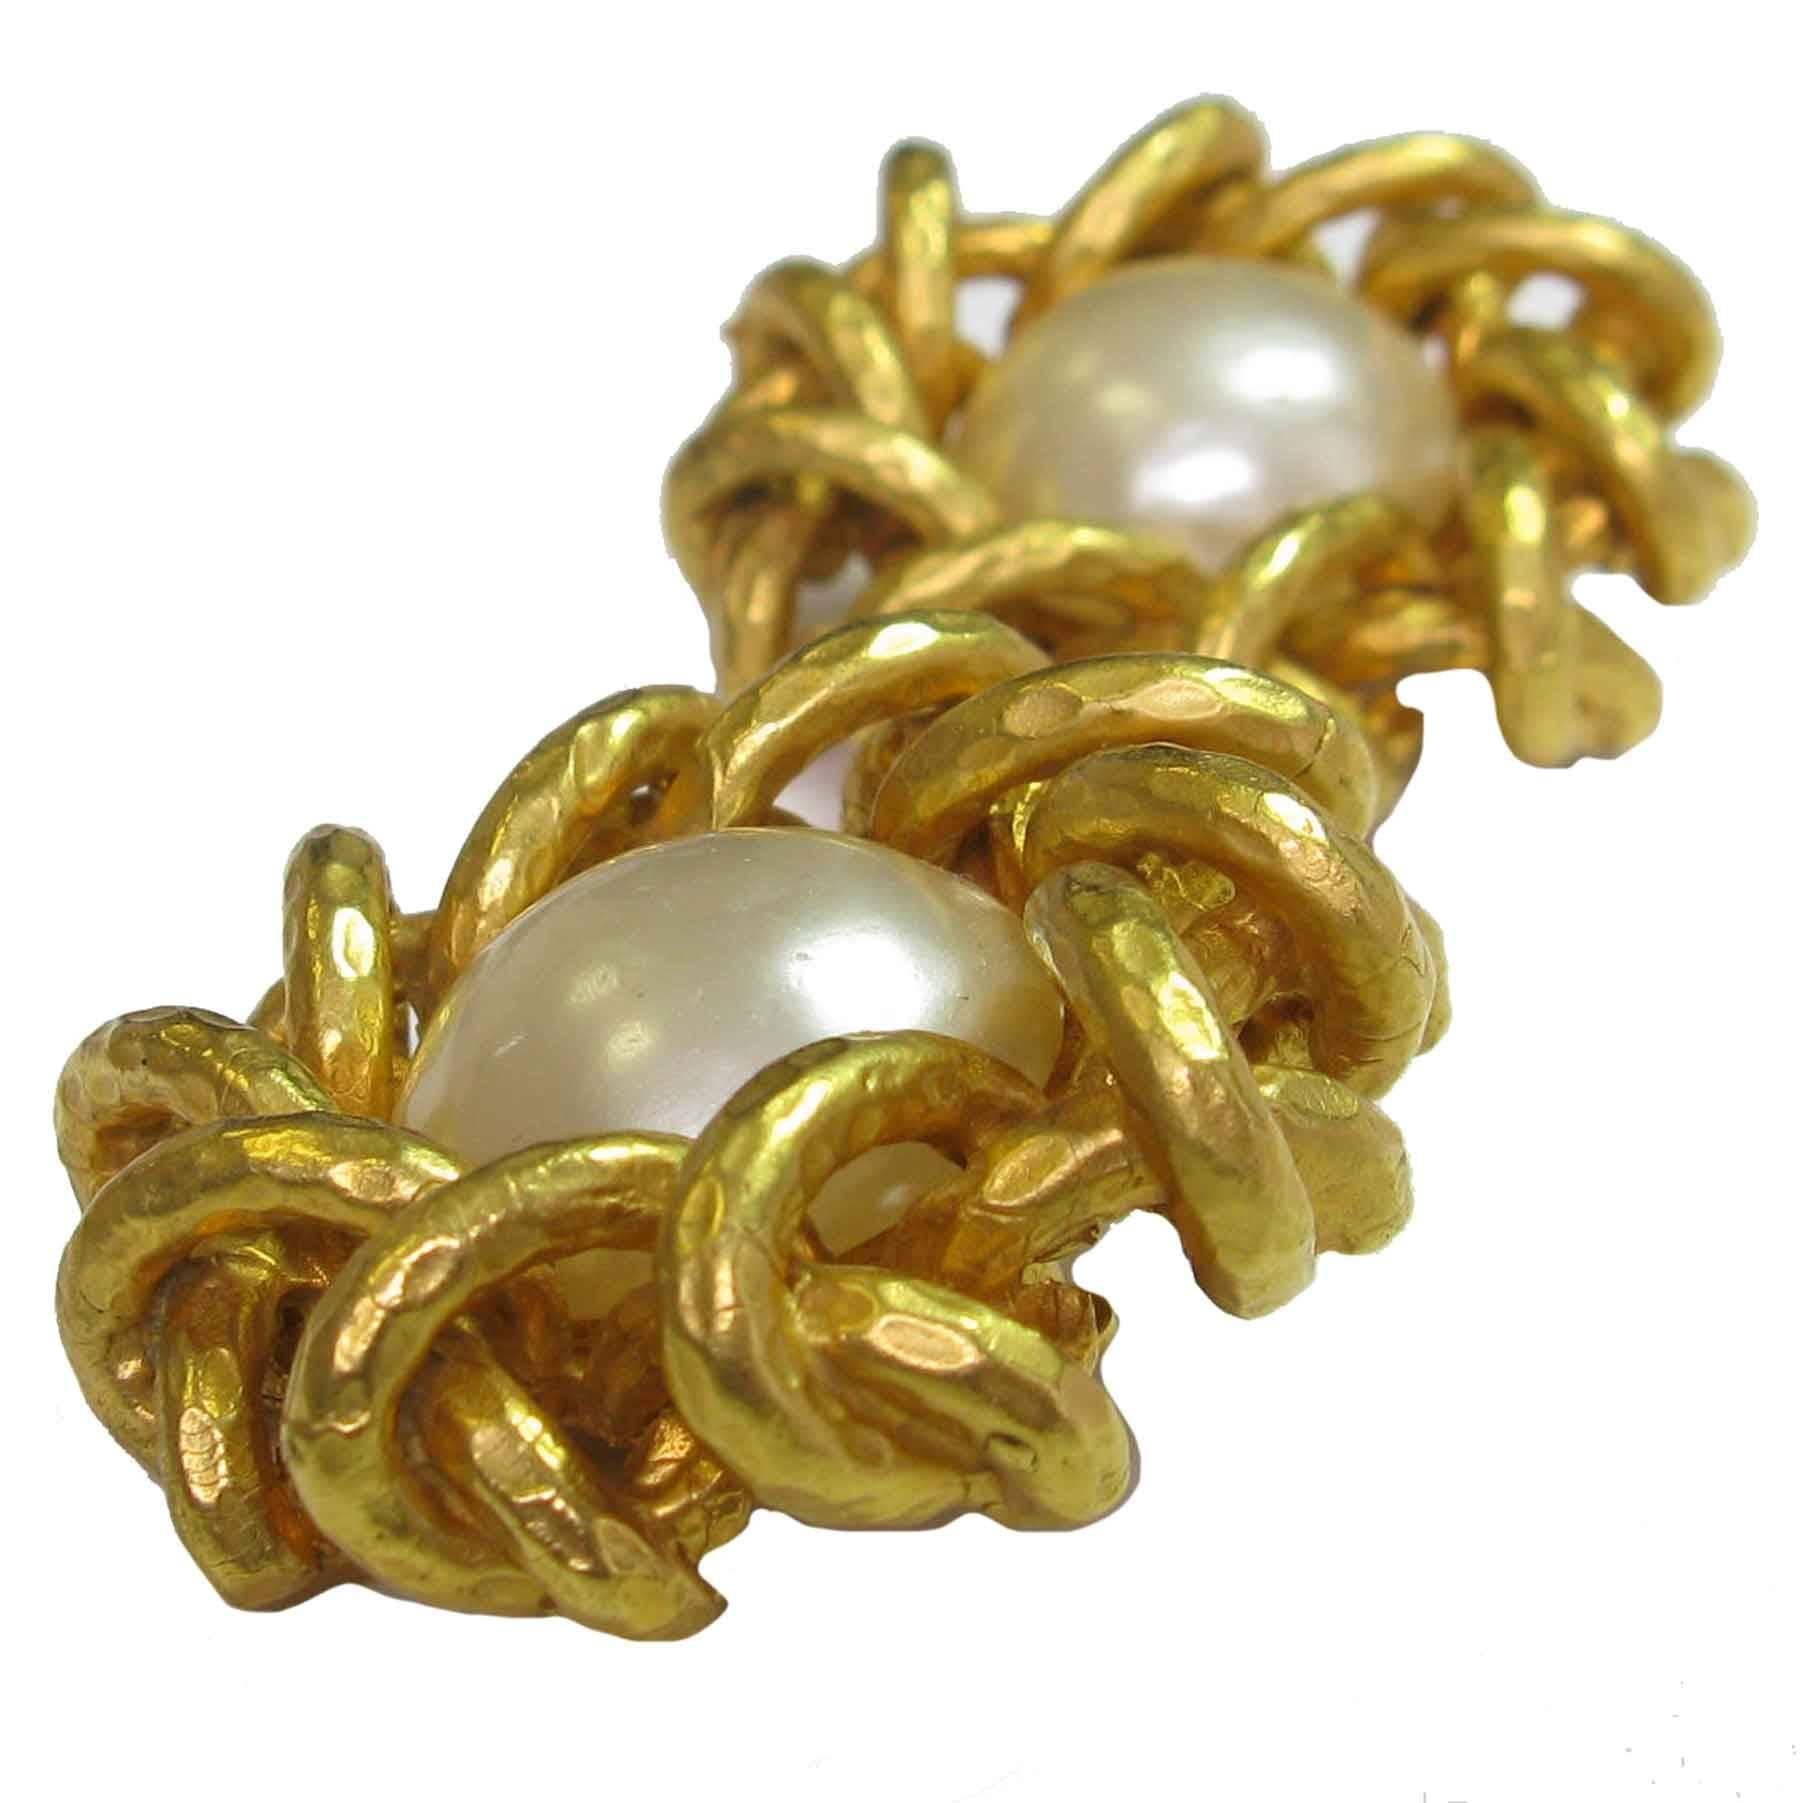 Women's CHANEL Clip-on Earrings in Hammered Gilded Metal and Pearly Bead